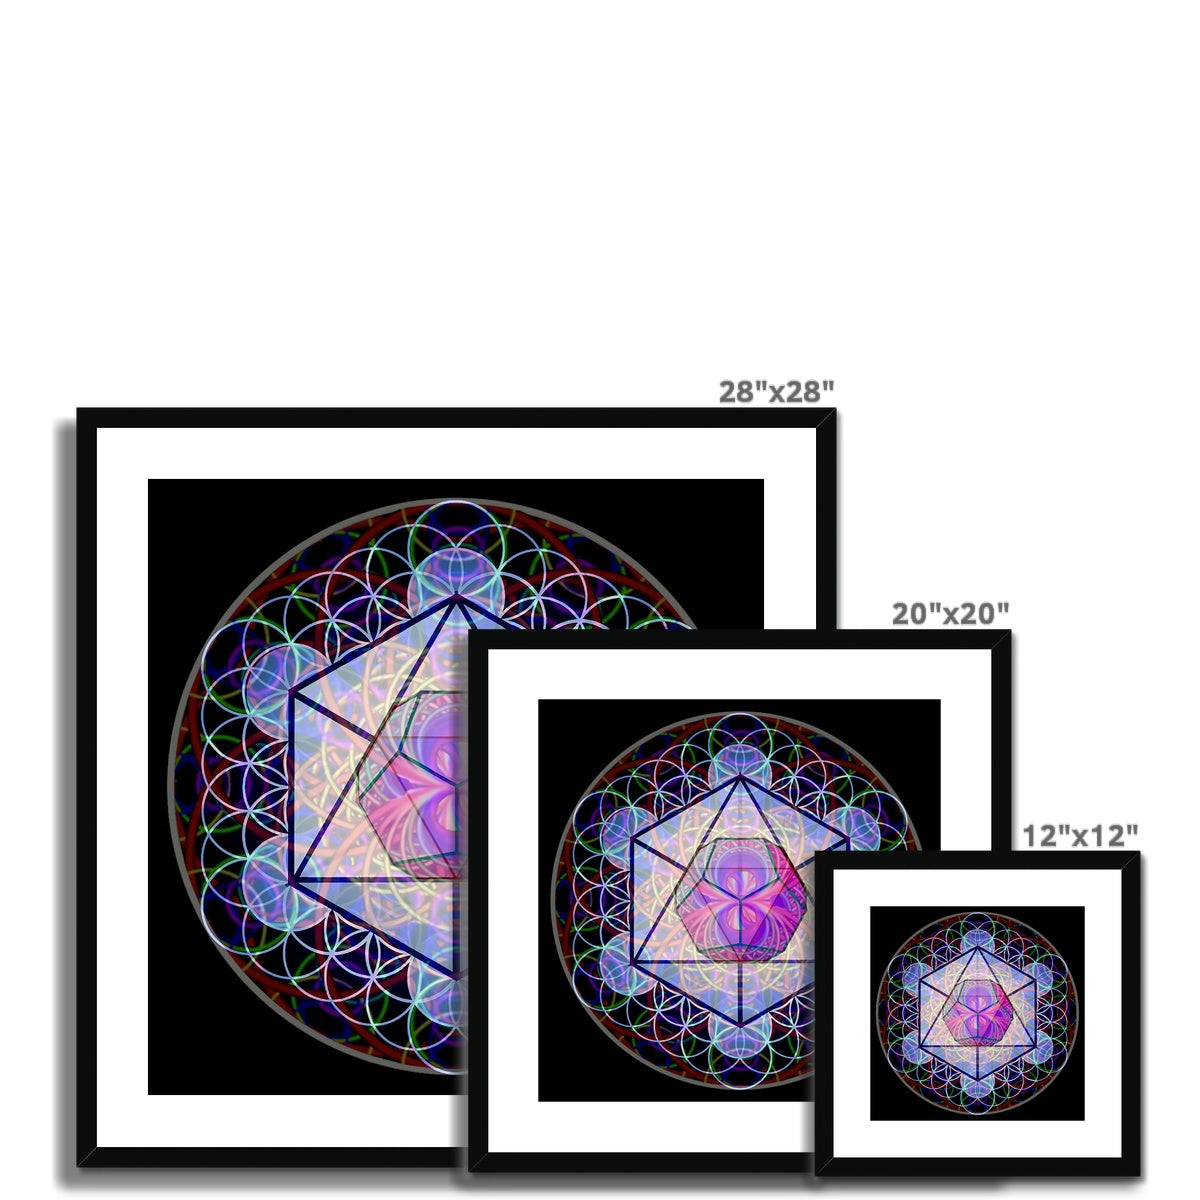 The Platonic Solid Dodecahedron with inverted Sound waves Framed & Mounted Print